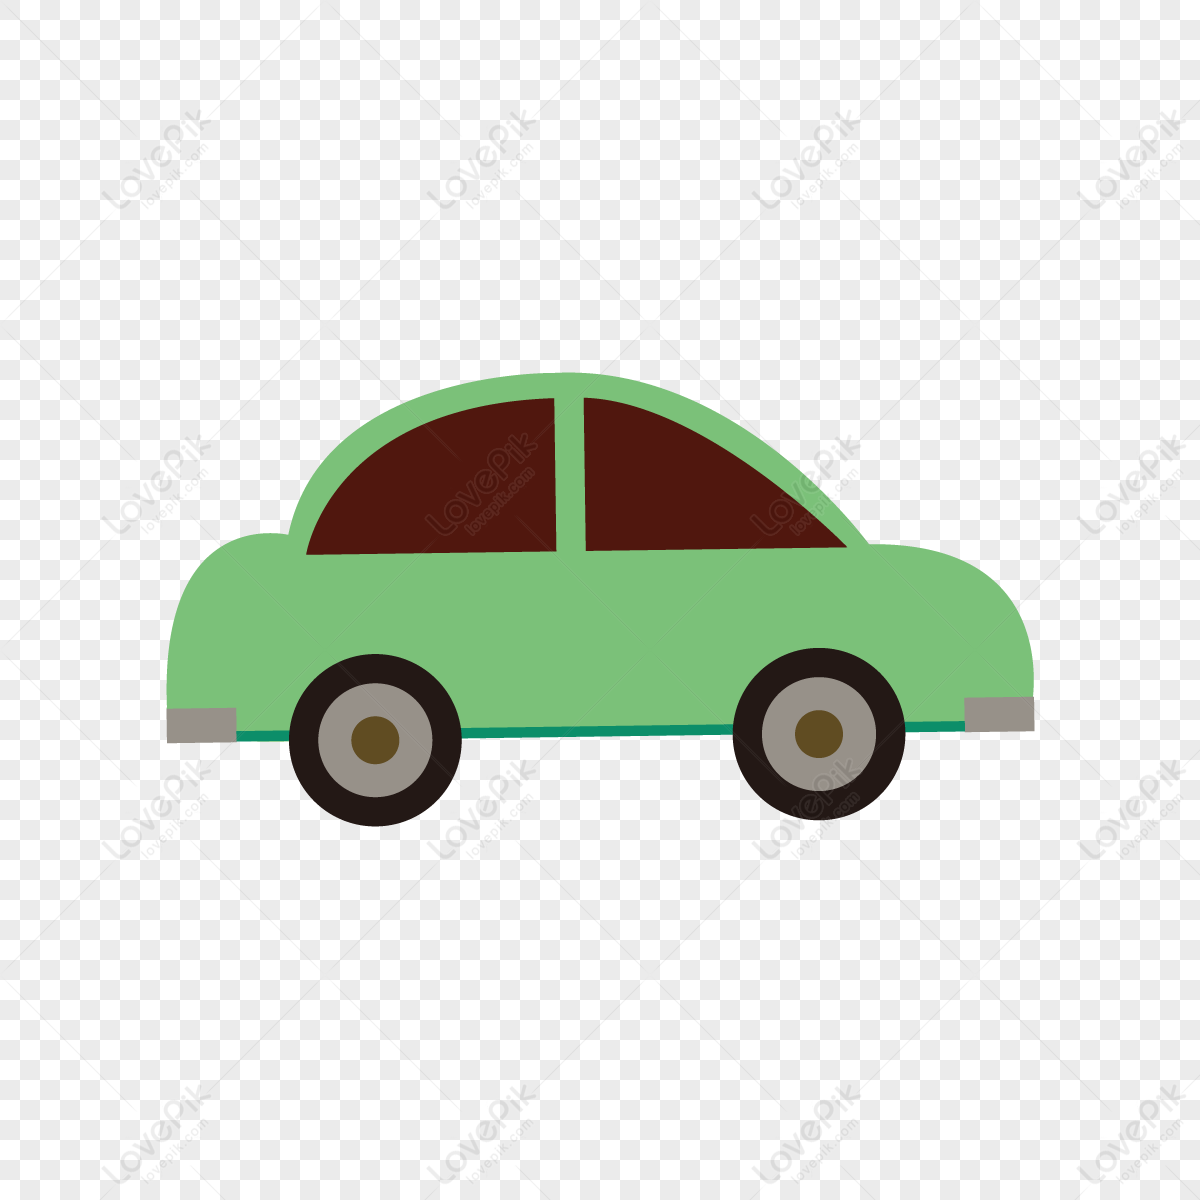 Cartoon Car PNG Hd Transparent Image And Clipart Image For Free Download -  Lovepik | 400177154